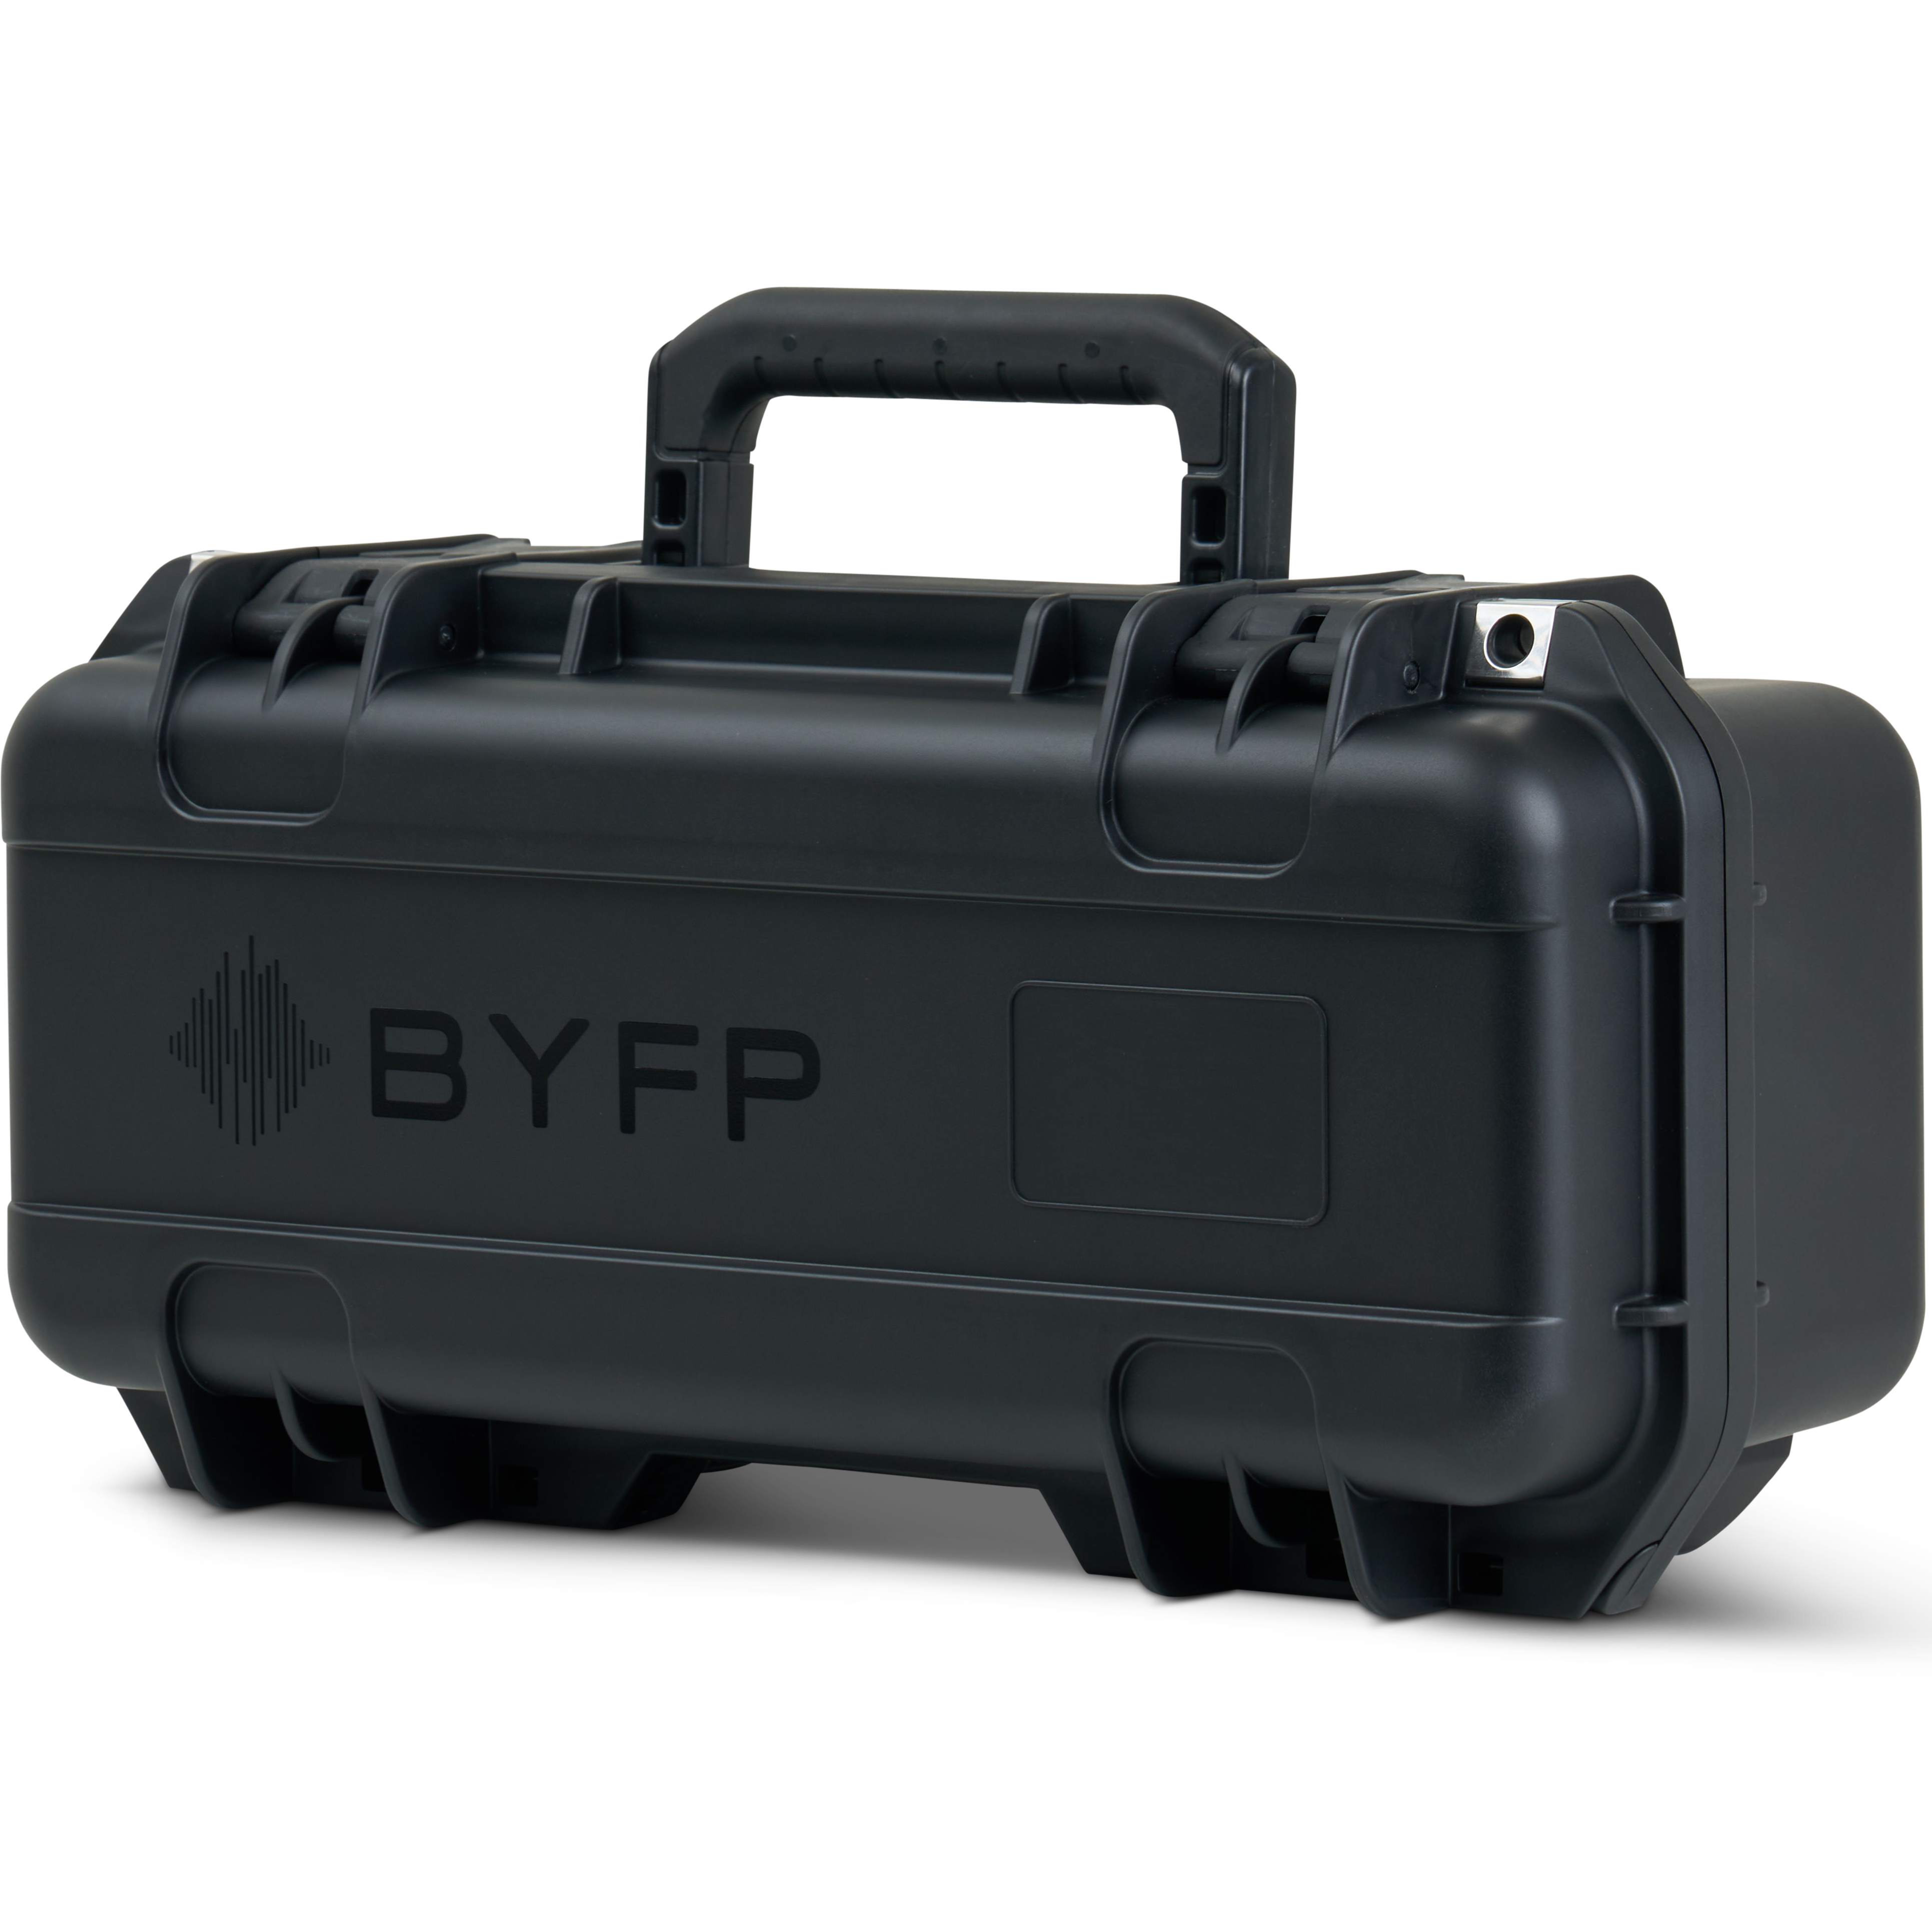 BYFP ipCase for ChamSys USB Interface